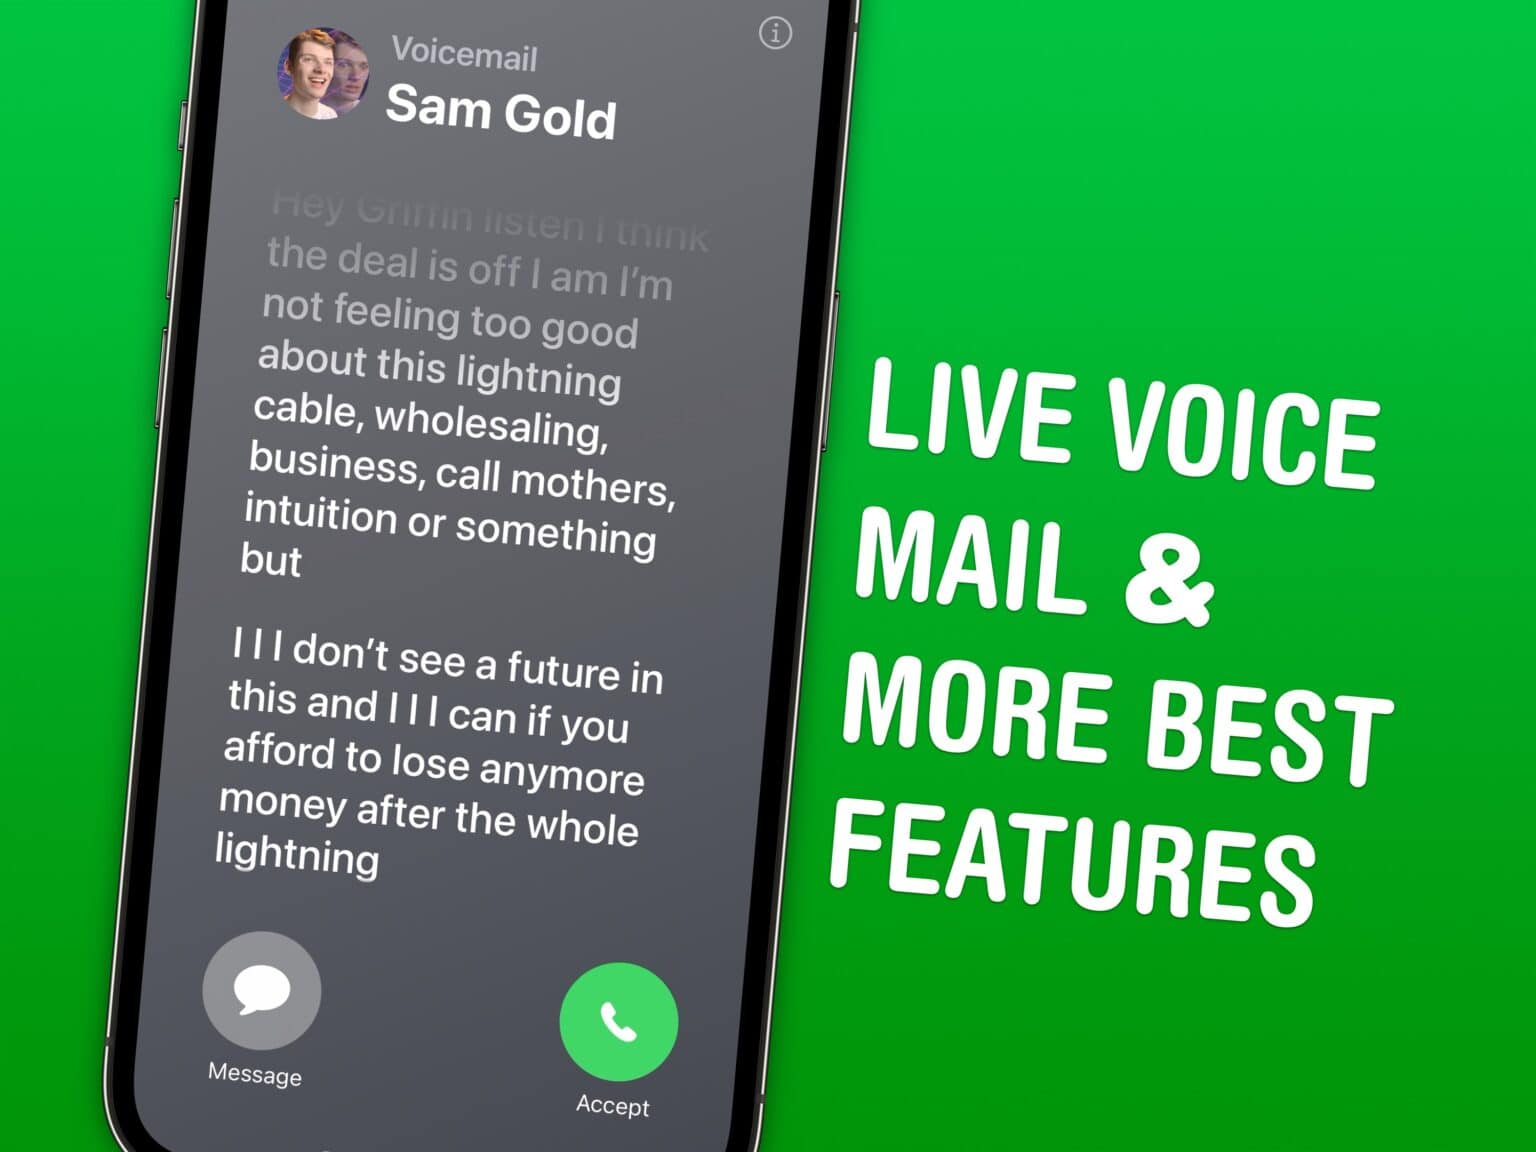 Live Voicemail & More Best Features